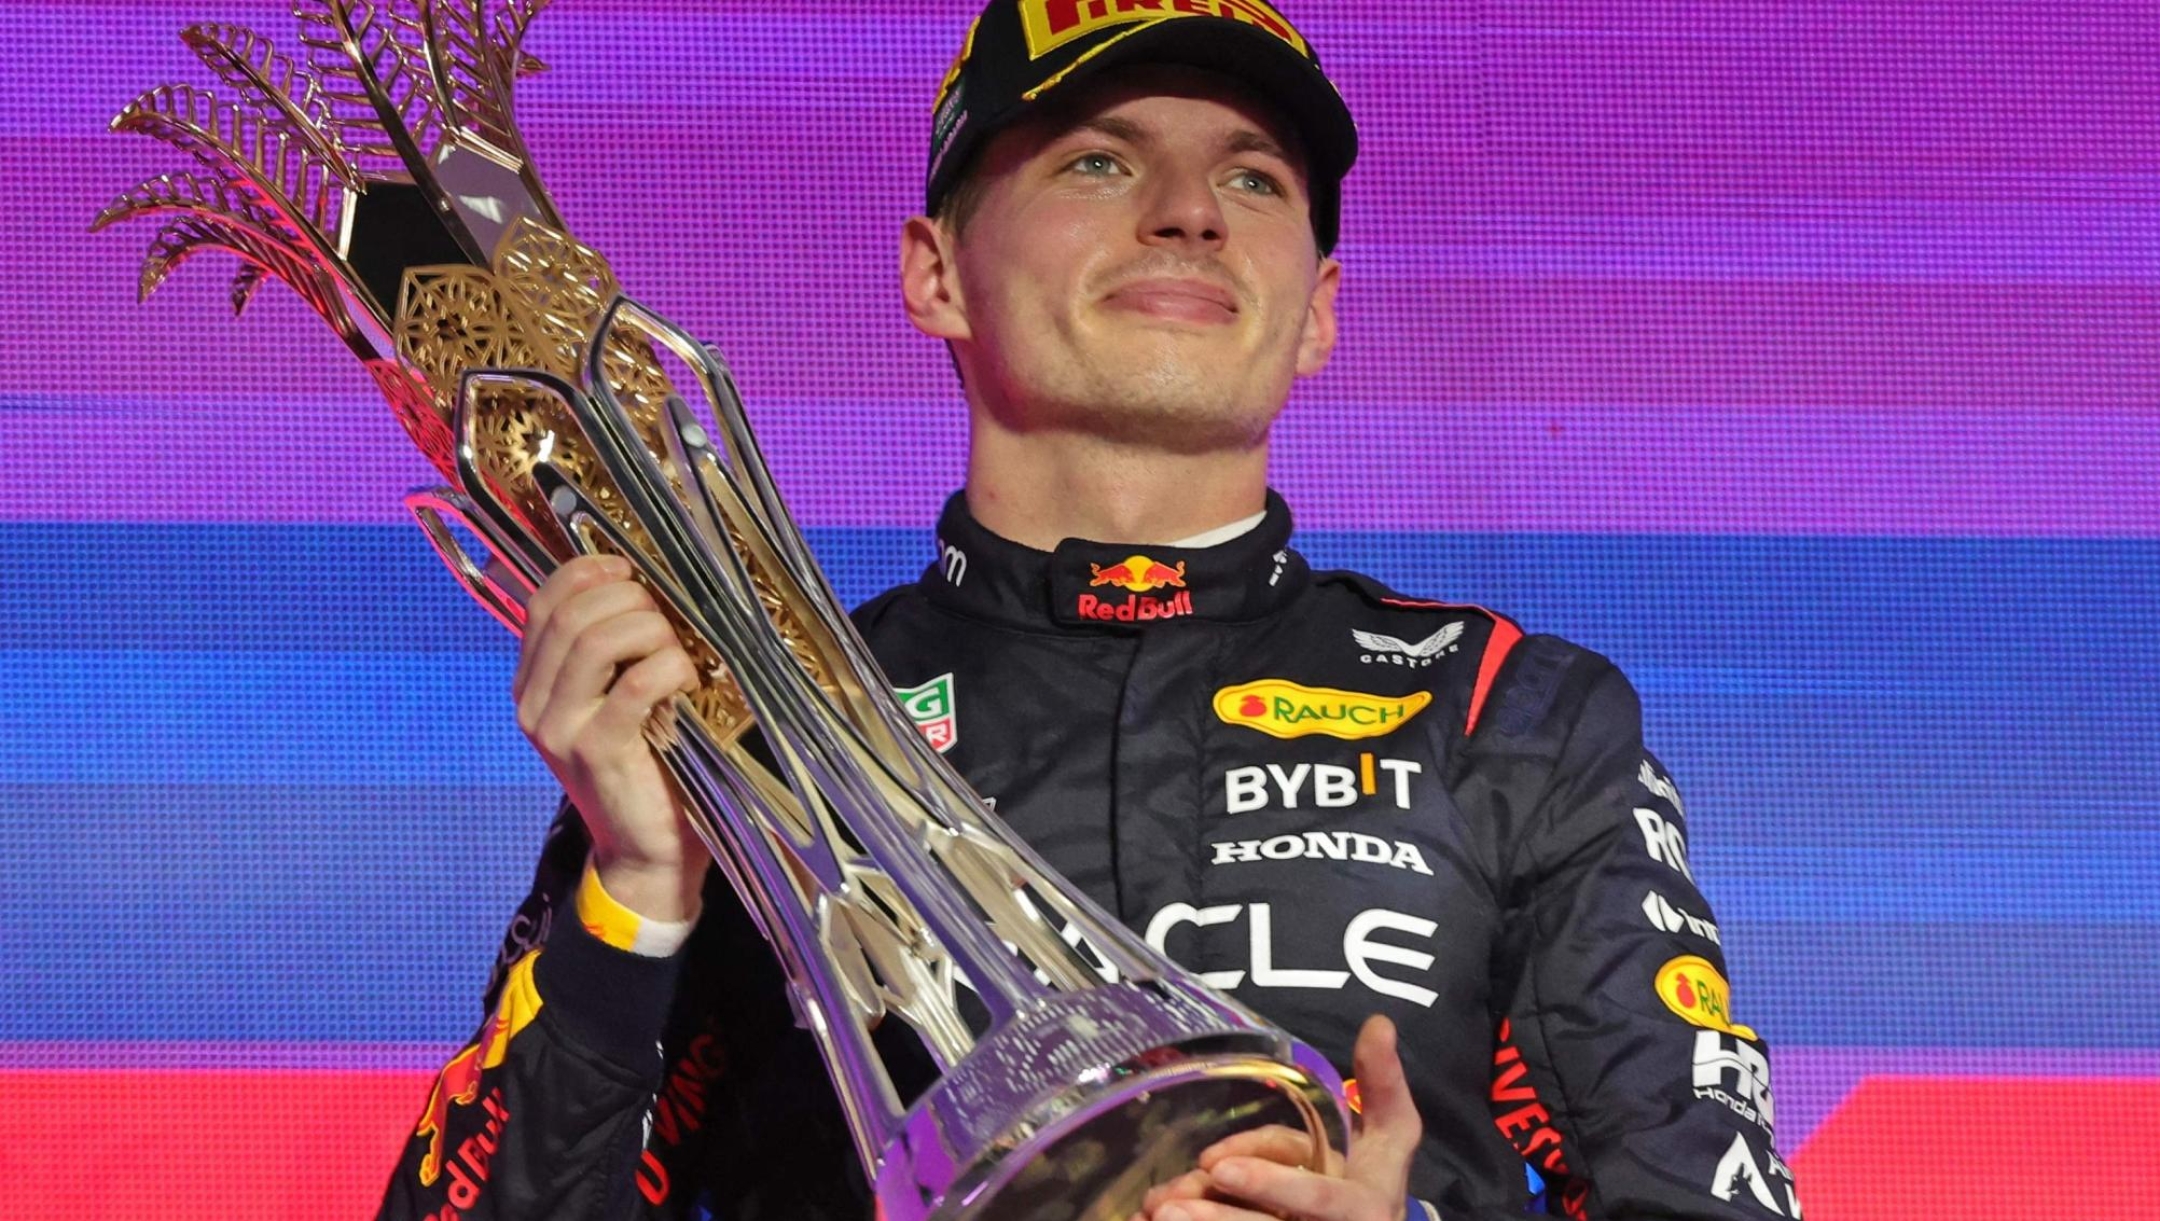 Red Bull Racing's Dutch driver Max Verstappen celebrates winning the Saudi Arabian Formula One Grand Prix during the podium ceremony at the Jeddah Corniche Circuit in Jeddah on March 9, 2024. (Photo by Giuseppe CACACE / AFP)